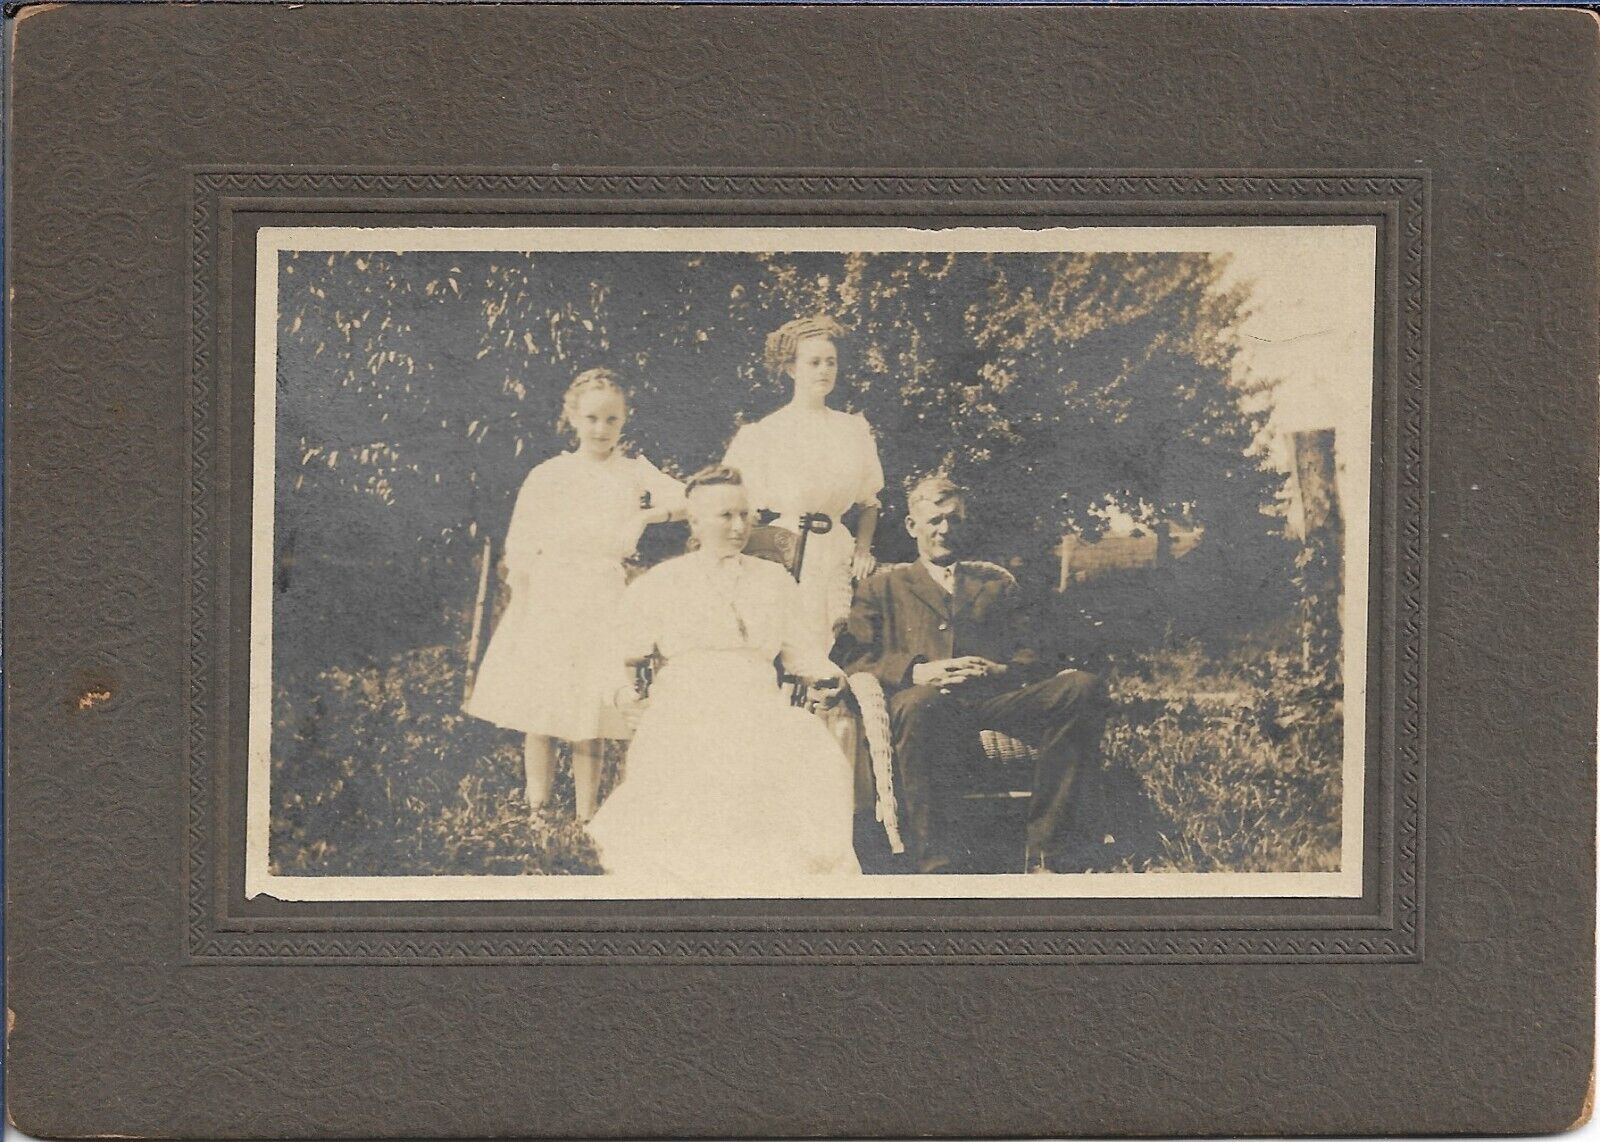 Family Outdoors Photograph Early 1900s Trees Vintage Cabinet Card